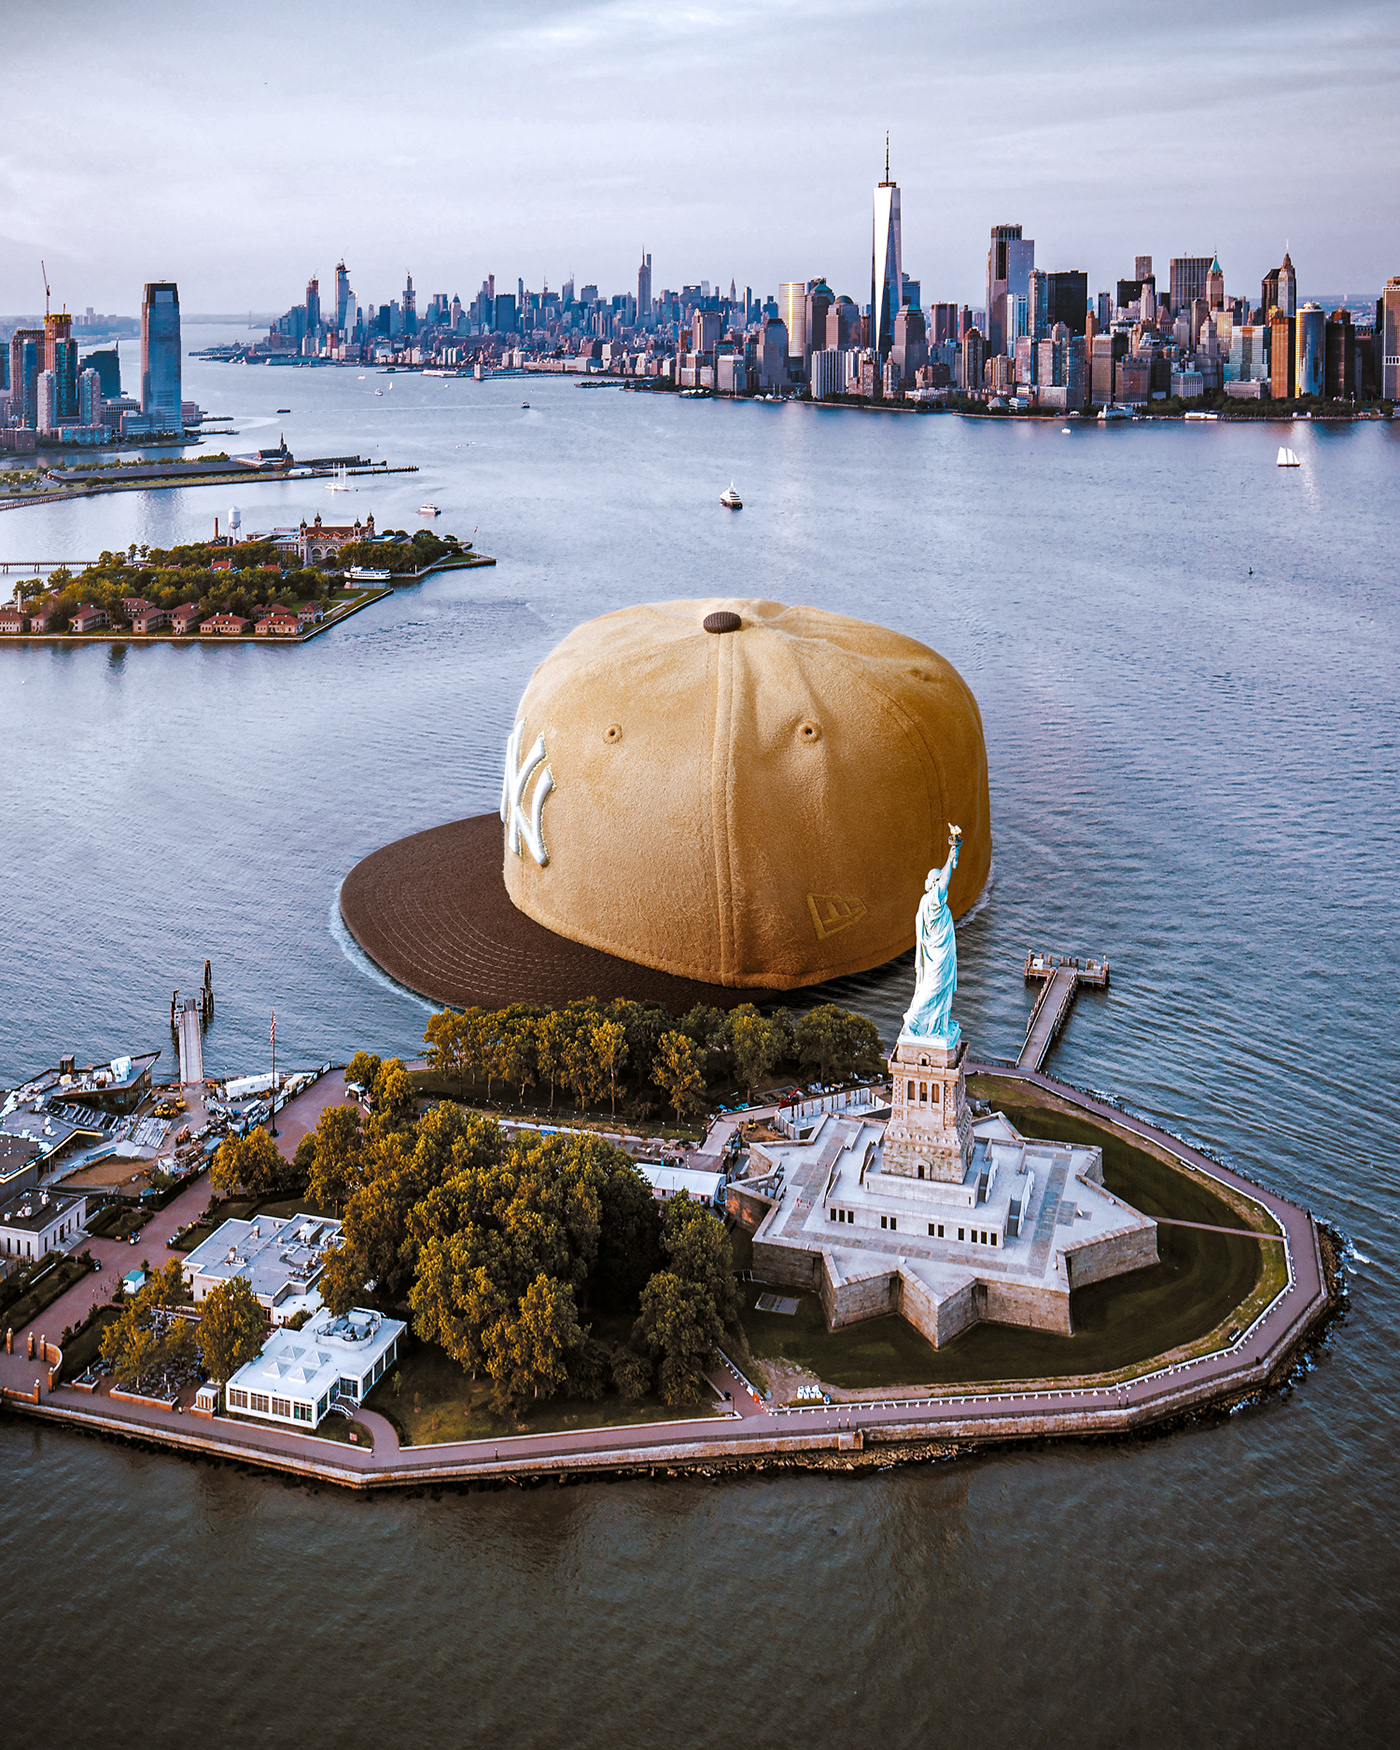 Giant hat photo composite. retouching and image manipulation done with photoshop